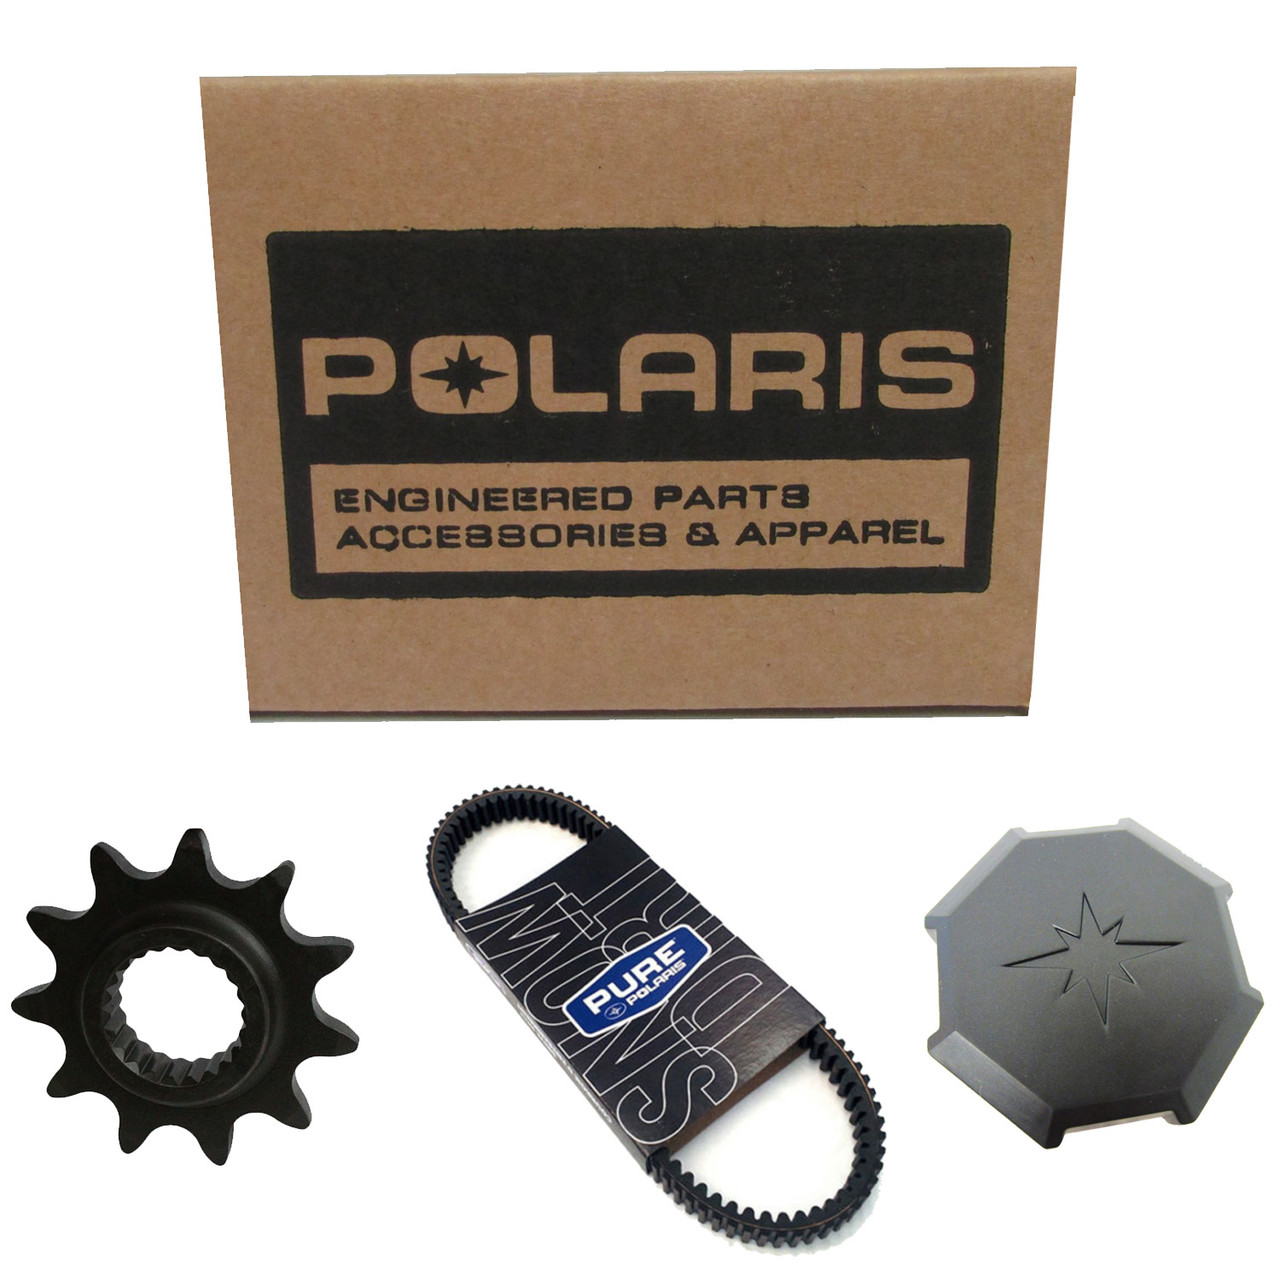 Polaris New OEM Cover-Side,Right Hand,250,Fred/Pwh/Gfx, 5437327-1314